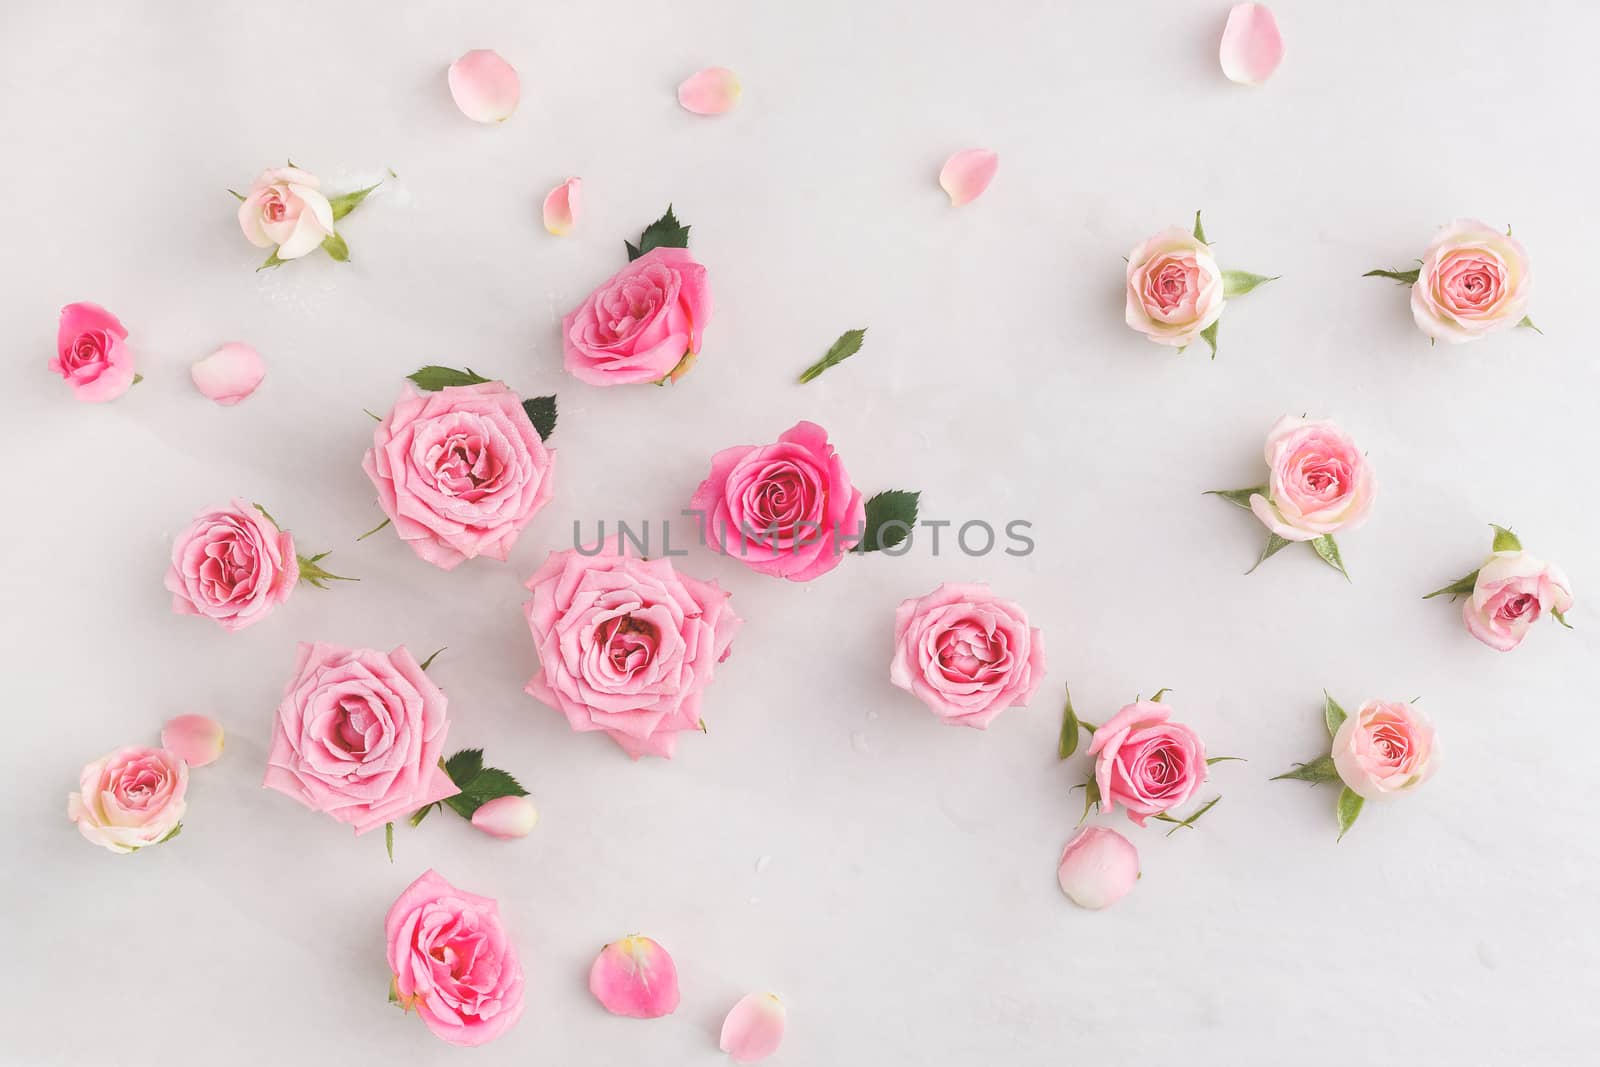 Various soft roses and leaves scattered on a vintage background, overhead view